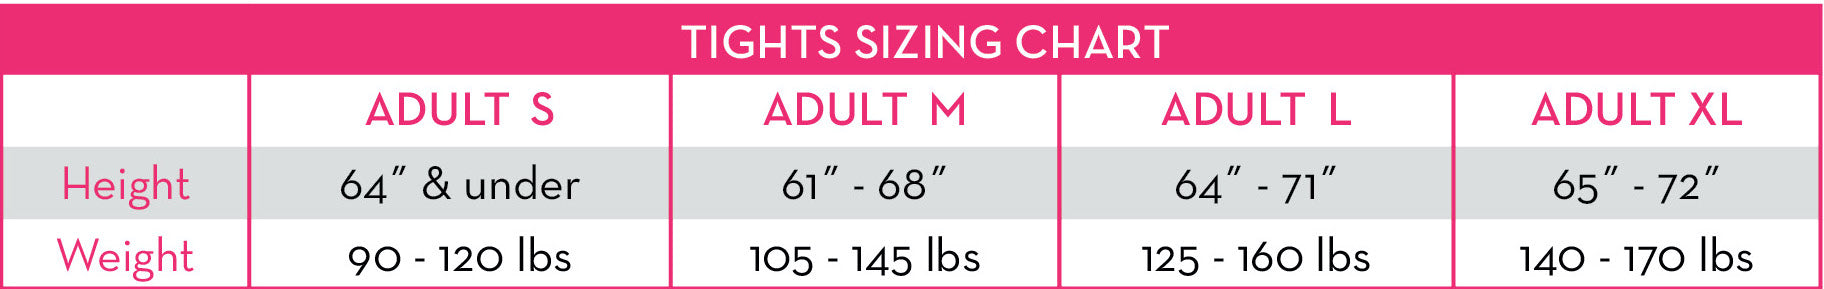 GM Adult Tights Size Chart